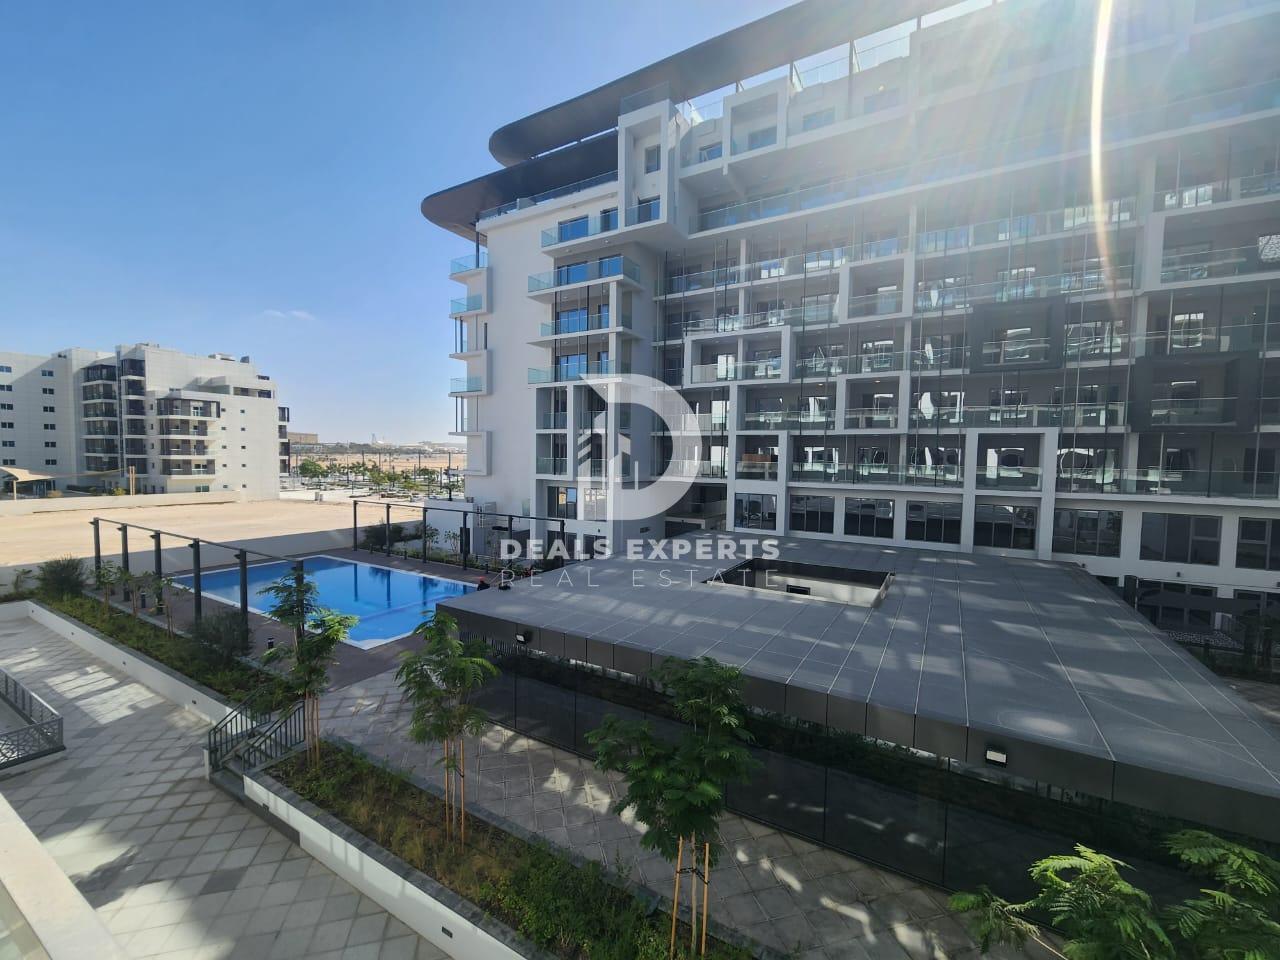 1 bath Apartment for rent in Oasis 1, Oasis Residences, Masdar City, Abu Dhabi for price AED 48000 yearly 